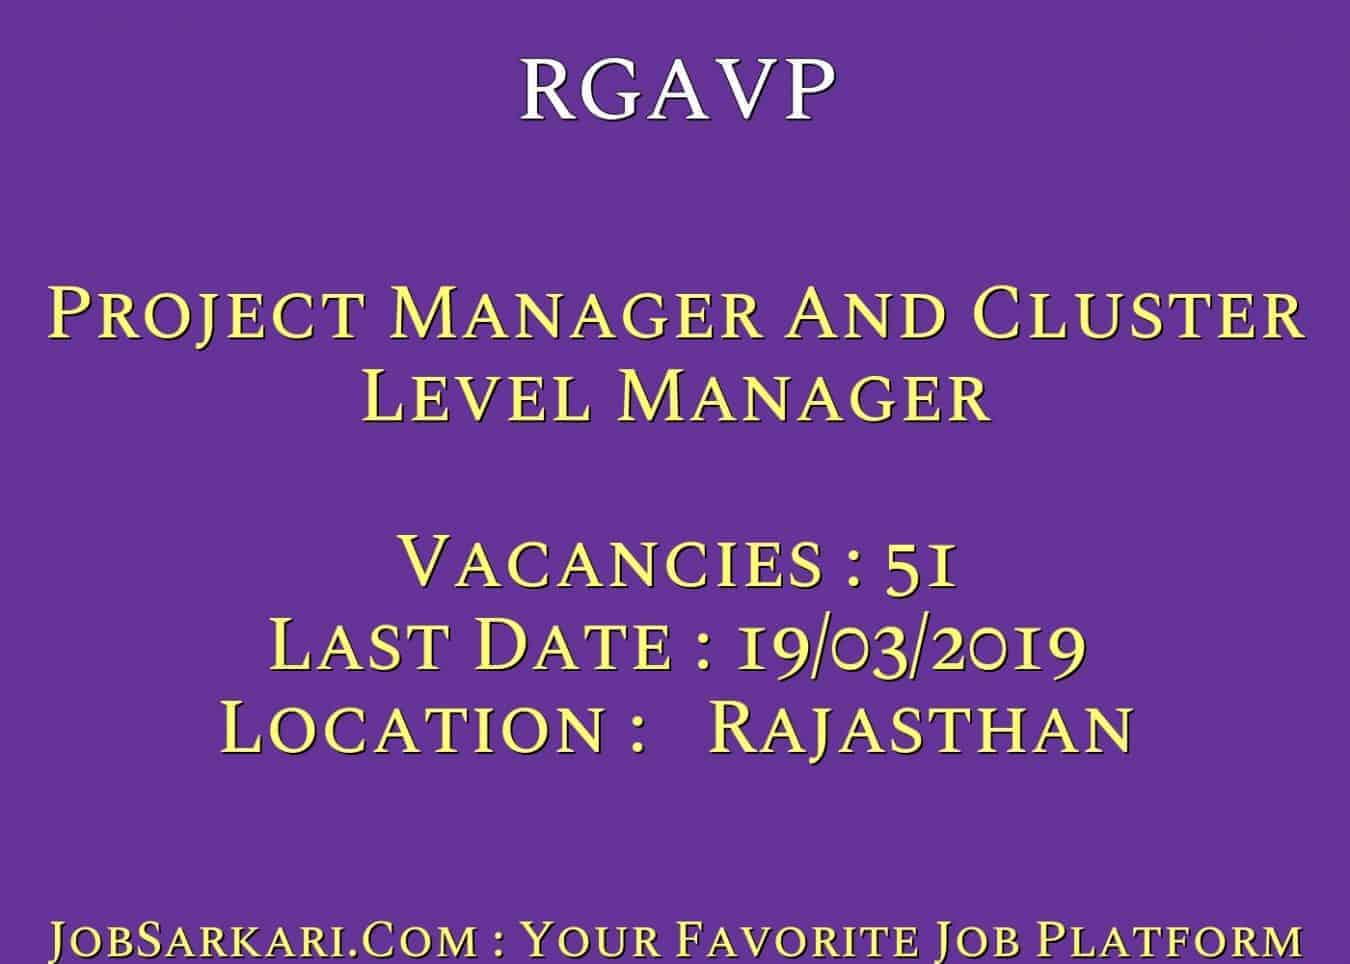 RGAVP Recruitment 2019 For Project Manager And Cluster Level Manager Govt Job